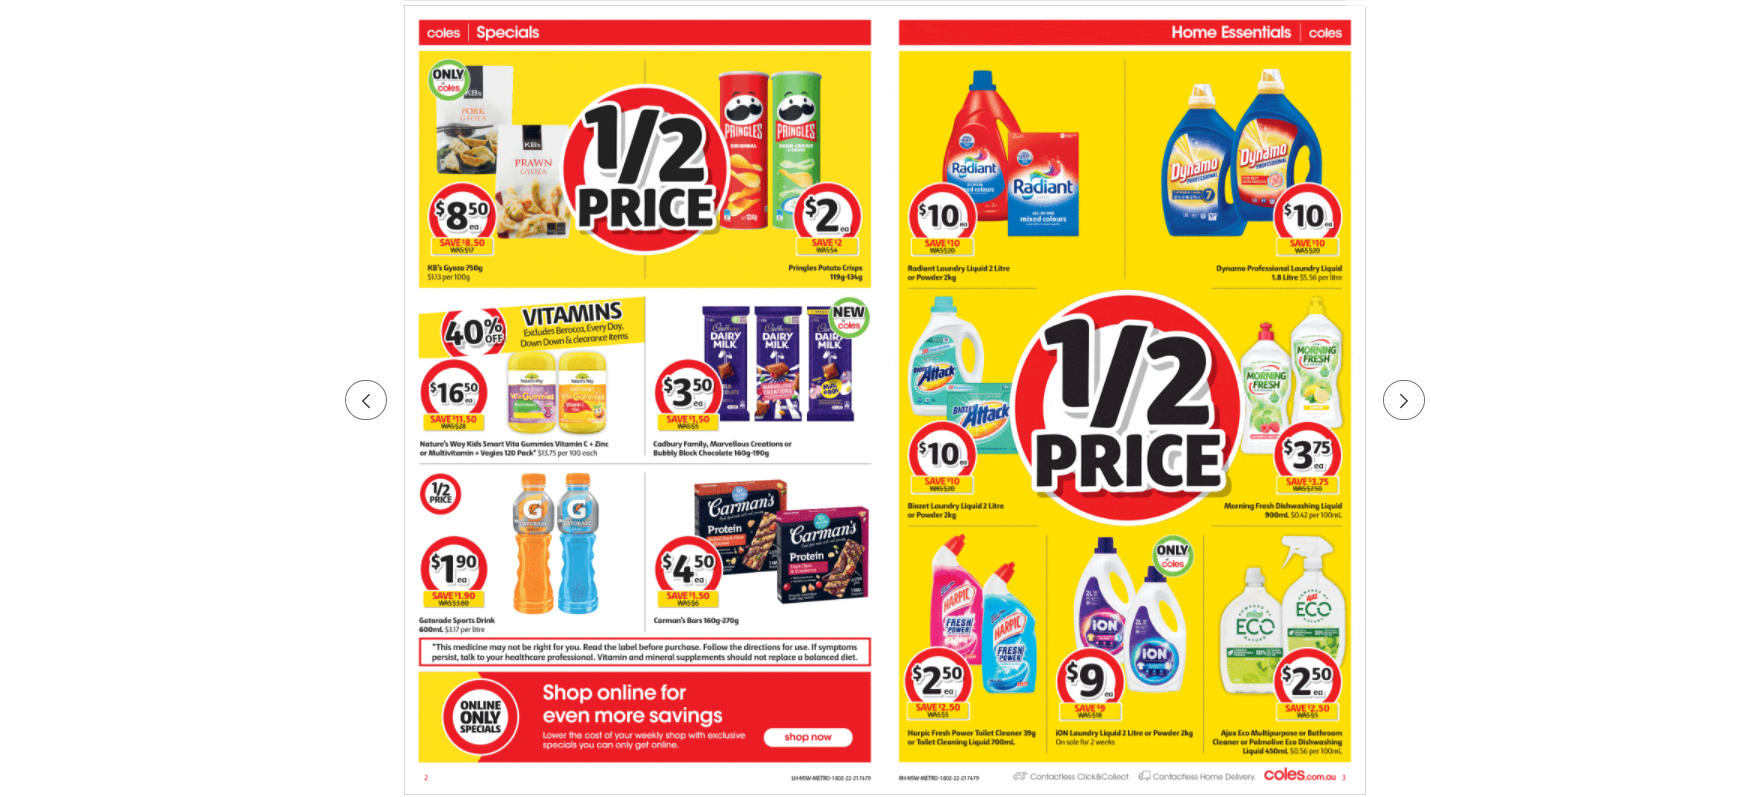 Coles this week's catalogue up to 50% OFF on groceries, beauty & everyday essentials(until 22nd Feb)